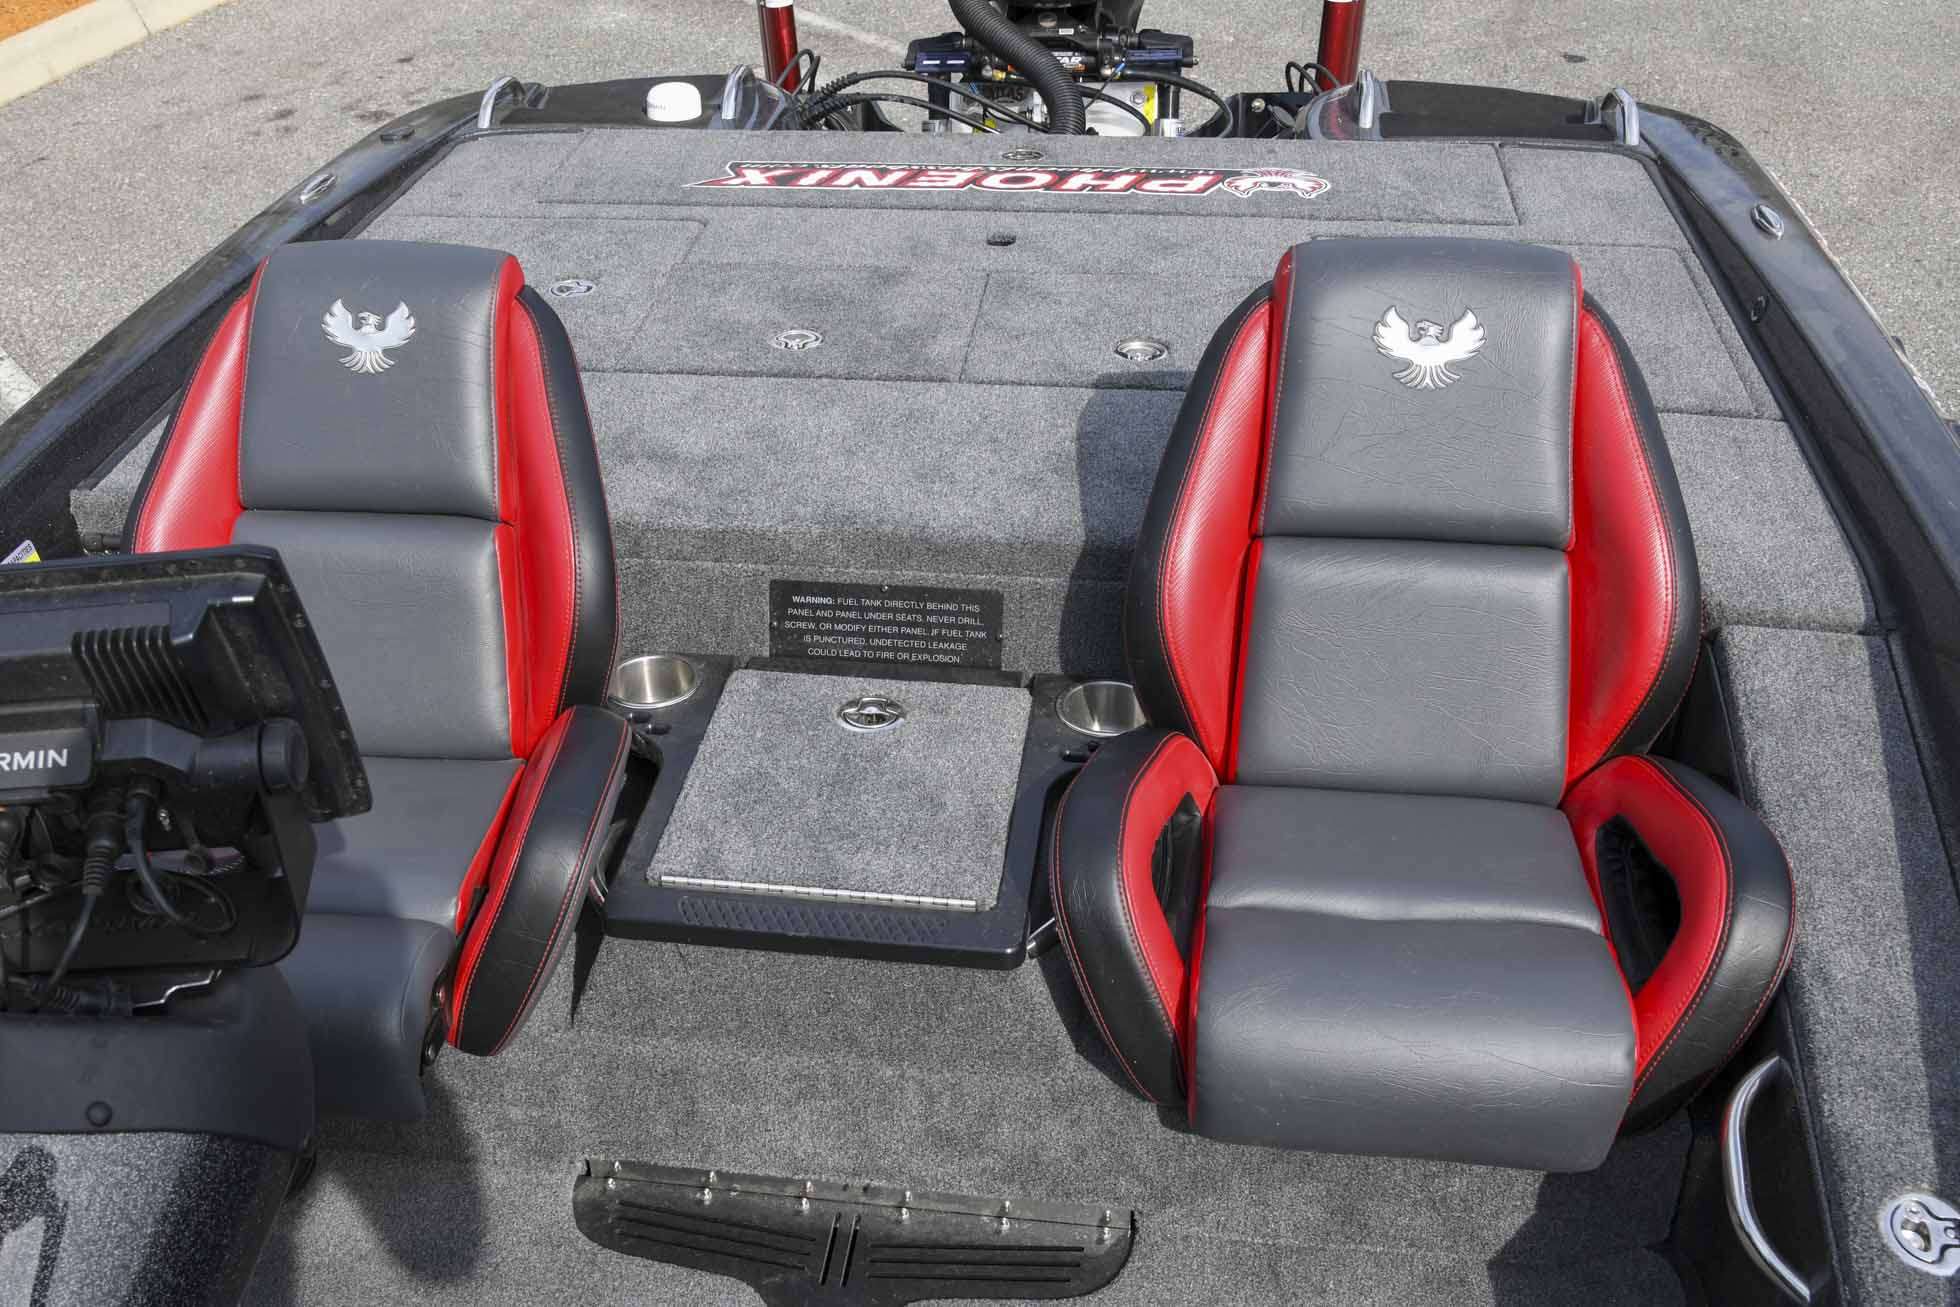 Comfortable seats make long runs more manageable, while also allowing for extra storage. The back deck also is spacious, concealing his livewells, extra storage compartments and his bilge area.
